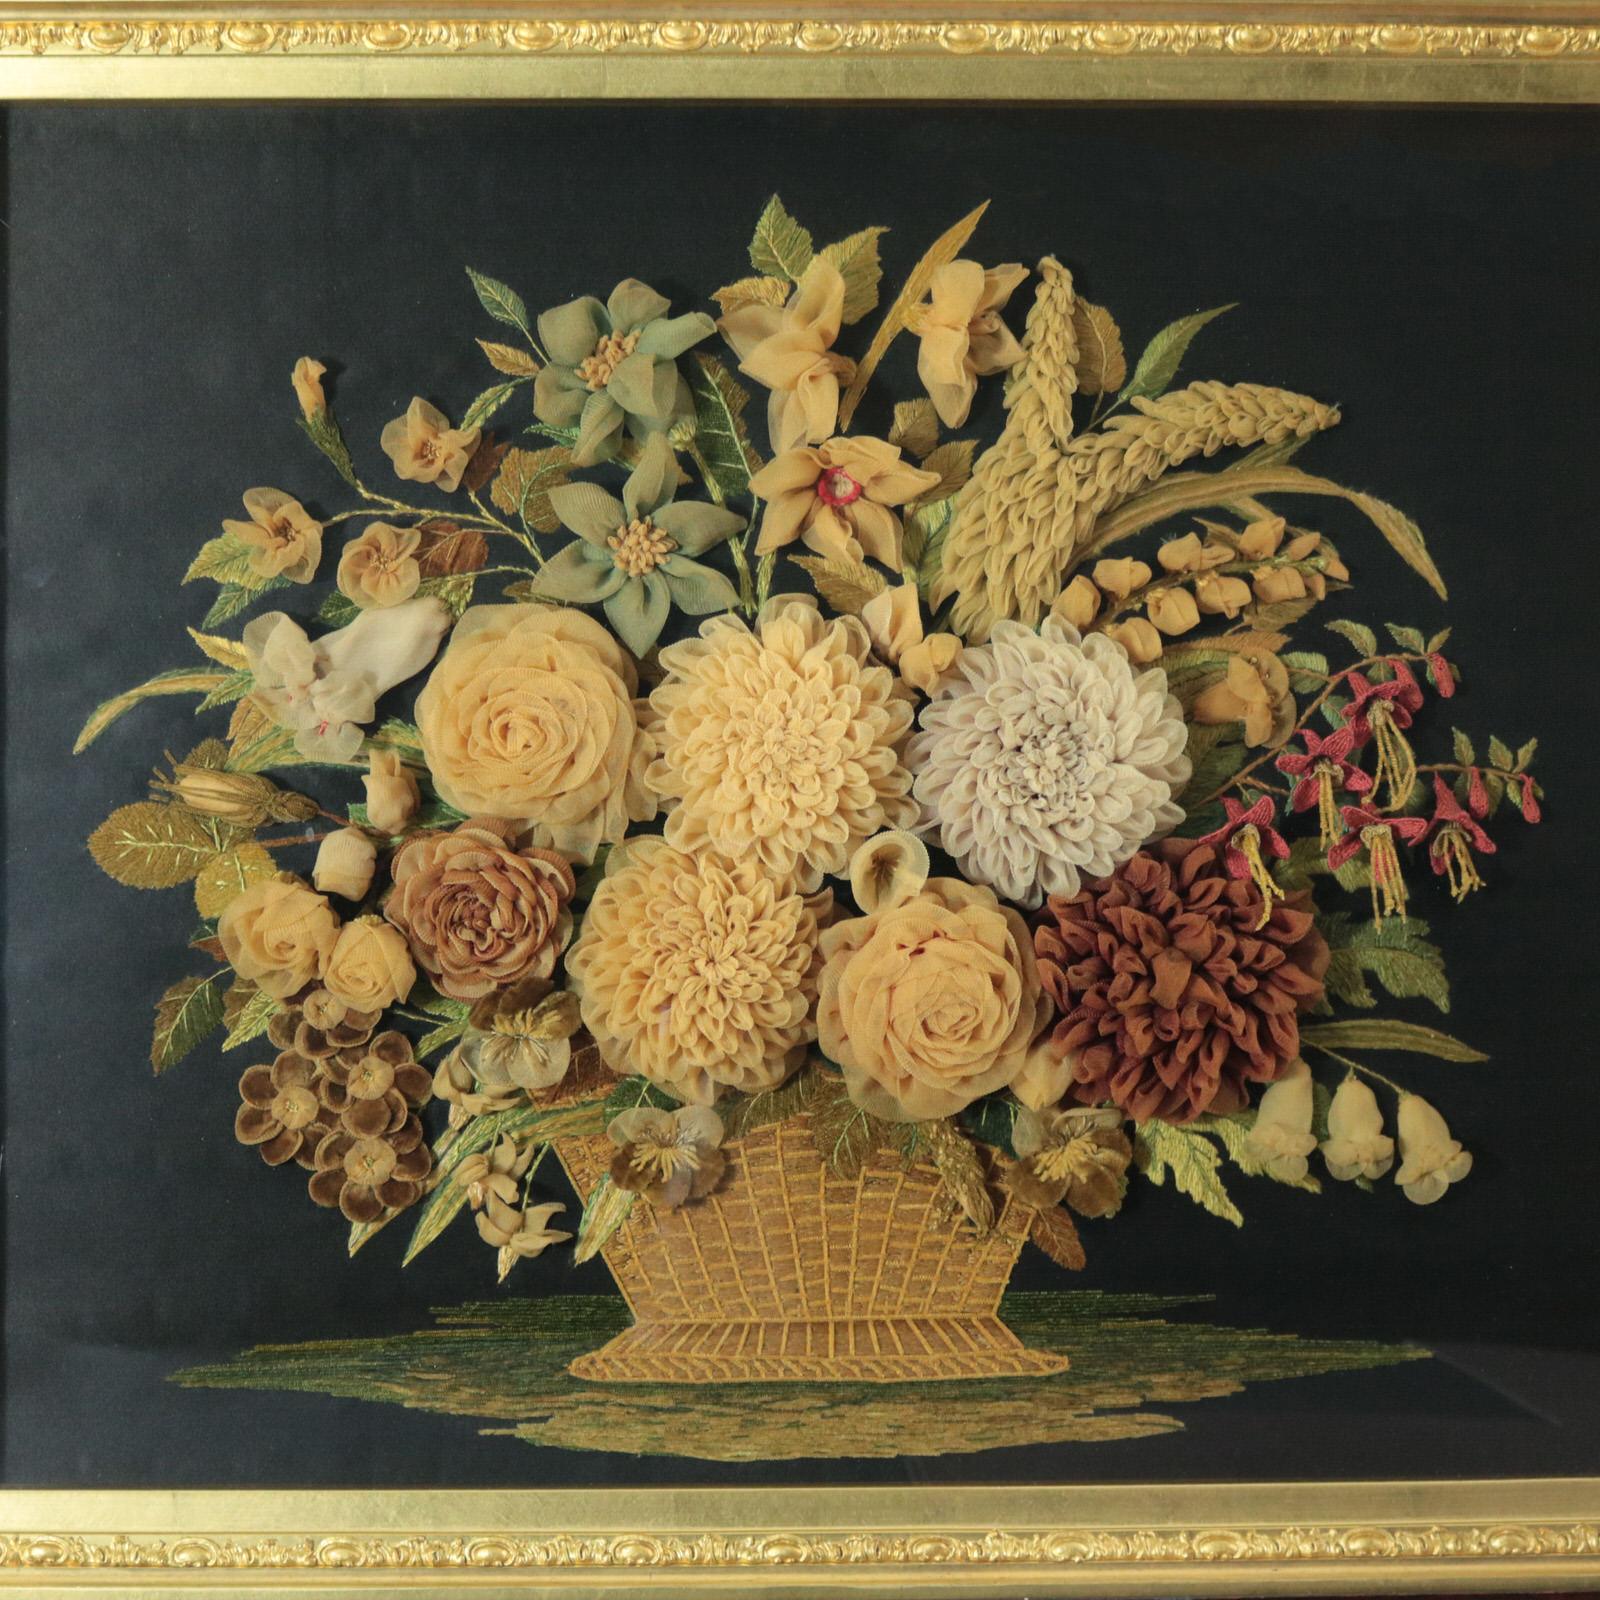 An embroidery picture of a basket of flowers. Deep relief raised work depicting leaves, twigs, flowers and grasses in a variety of techniques. The flowers are 3D, raised by about 1.5 inches. Worked in fine silks on dark linen ground, in a variety of